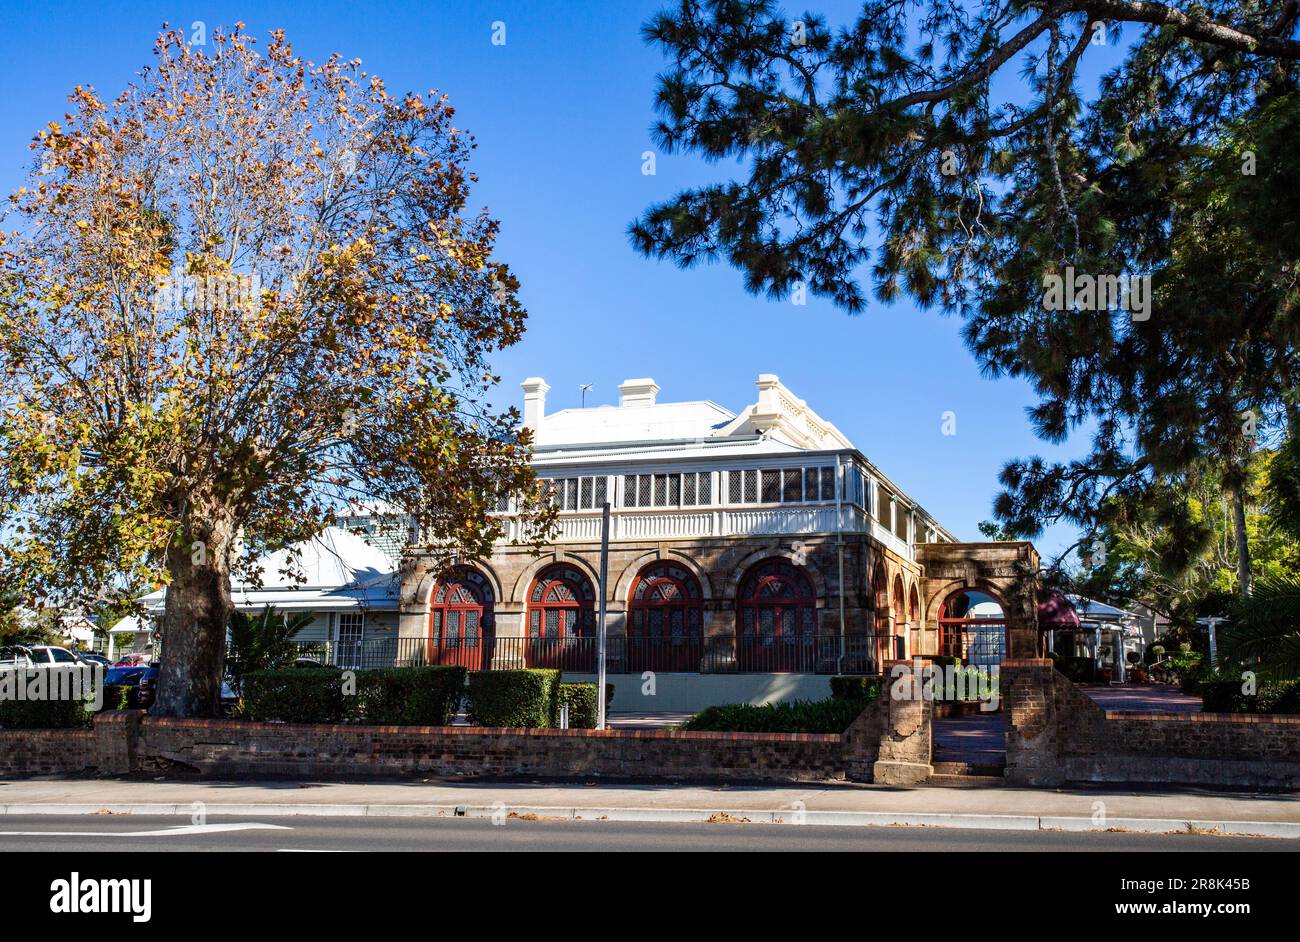 The heritage-listed Clifford House (Known as St James Palace) built in 1865 at Russell St, Toowoomba, Queensland Stock Photo